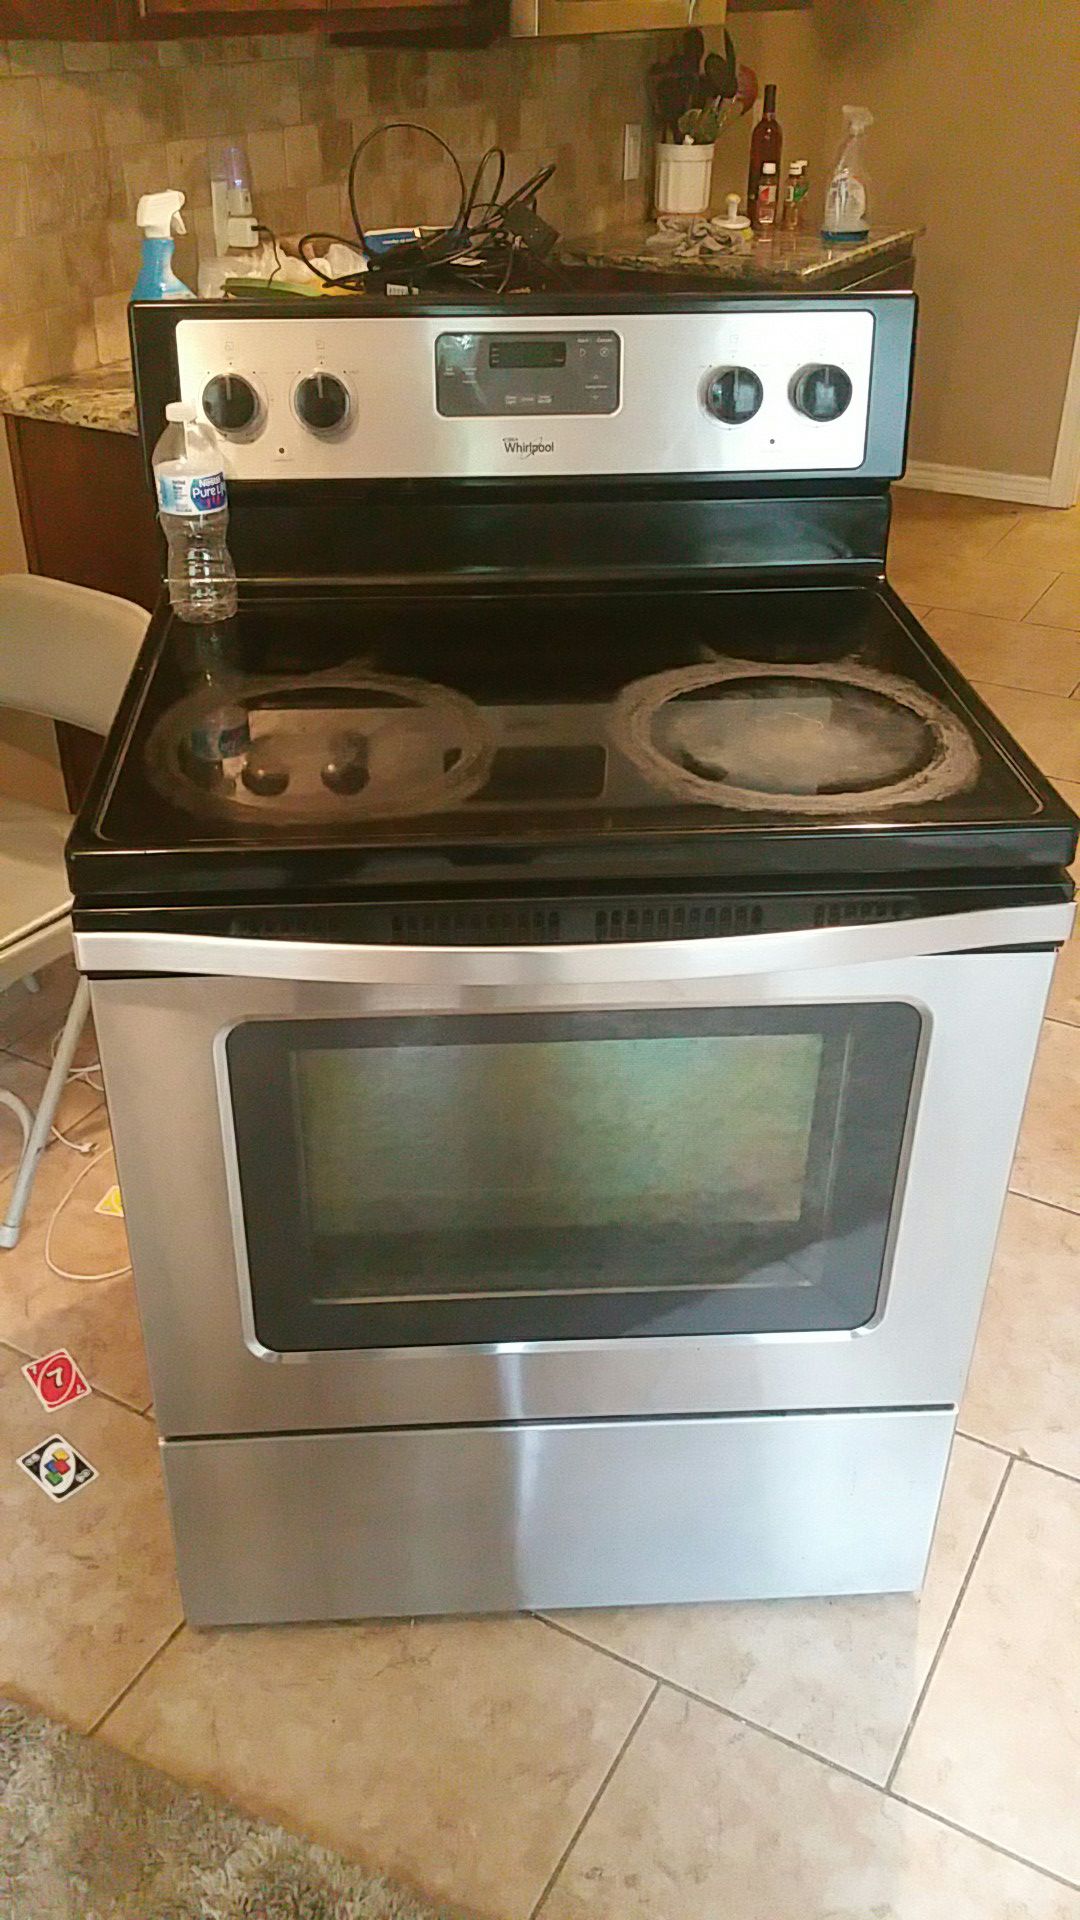 Whirlpool stove. Great condition. Moving and new house has appliances. Need gone